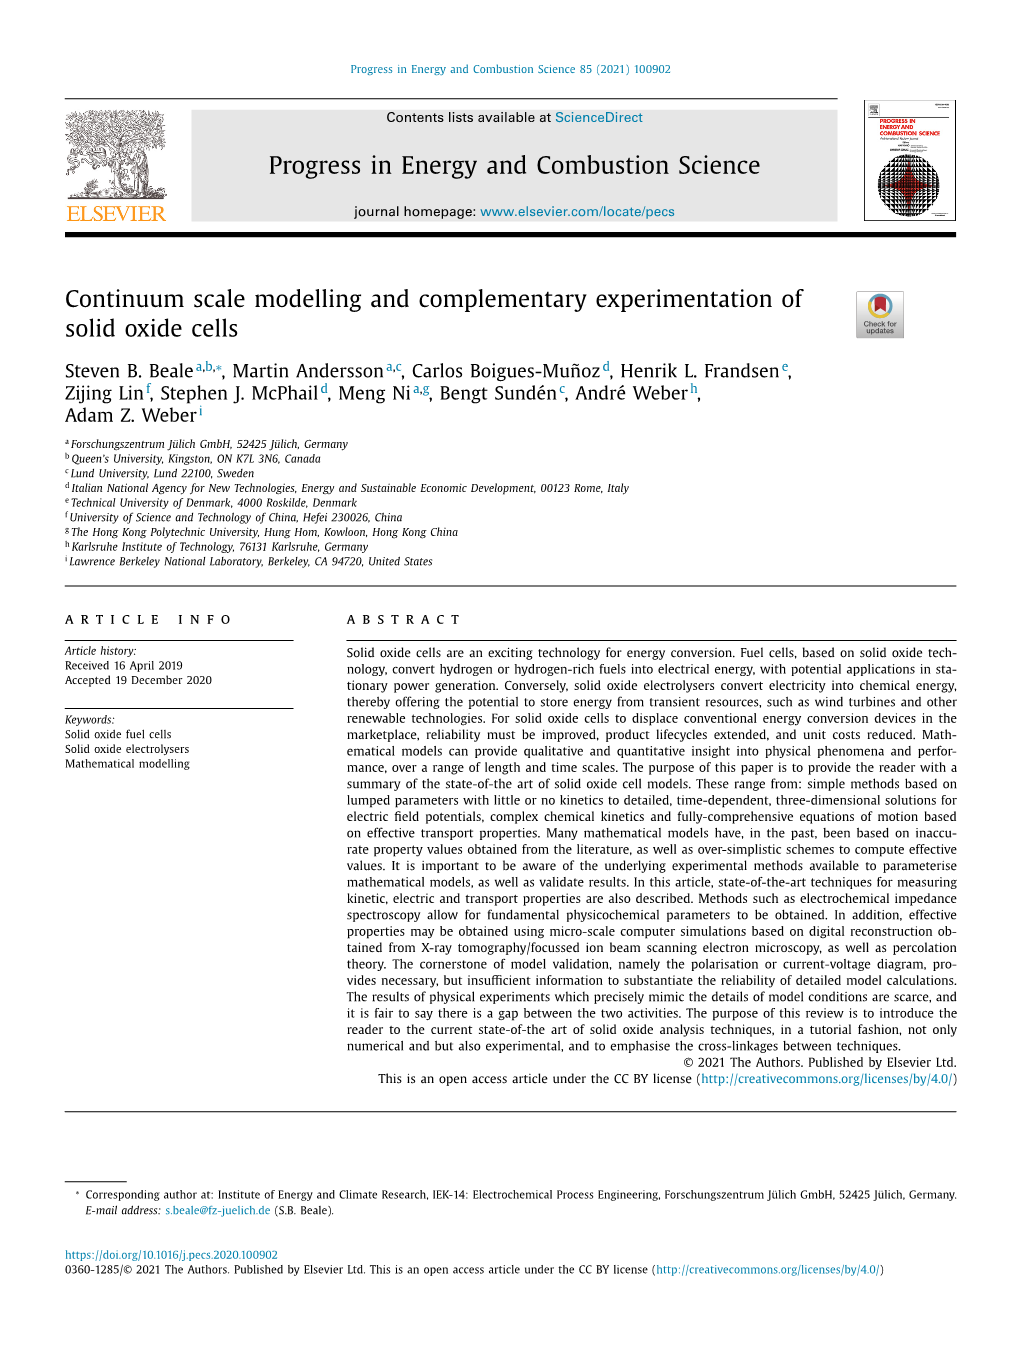 Continuum Scale Modelling and Complementary Experimentation of Solid Oxide Cells